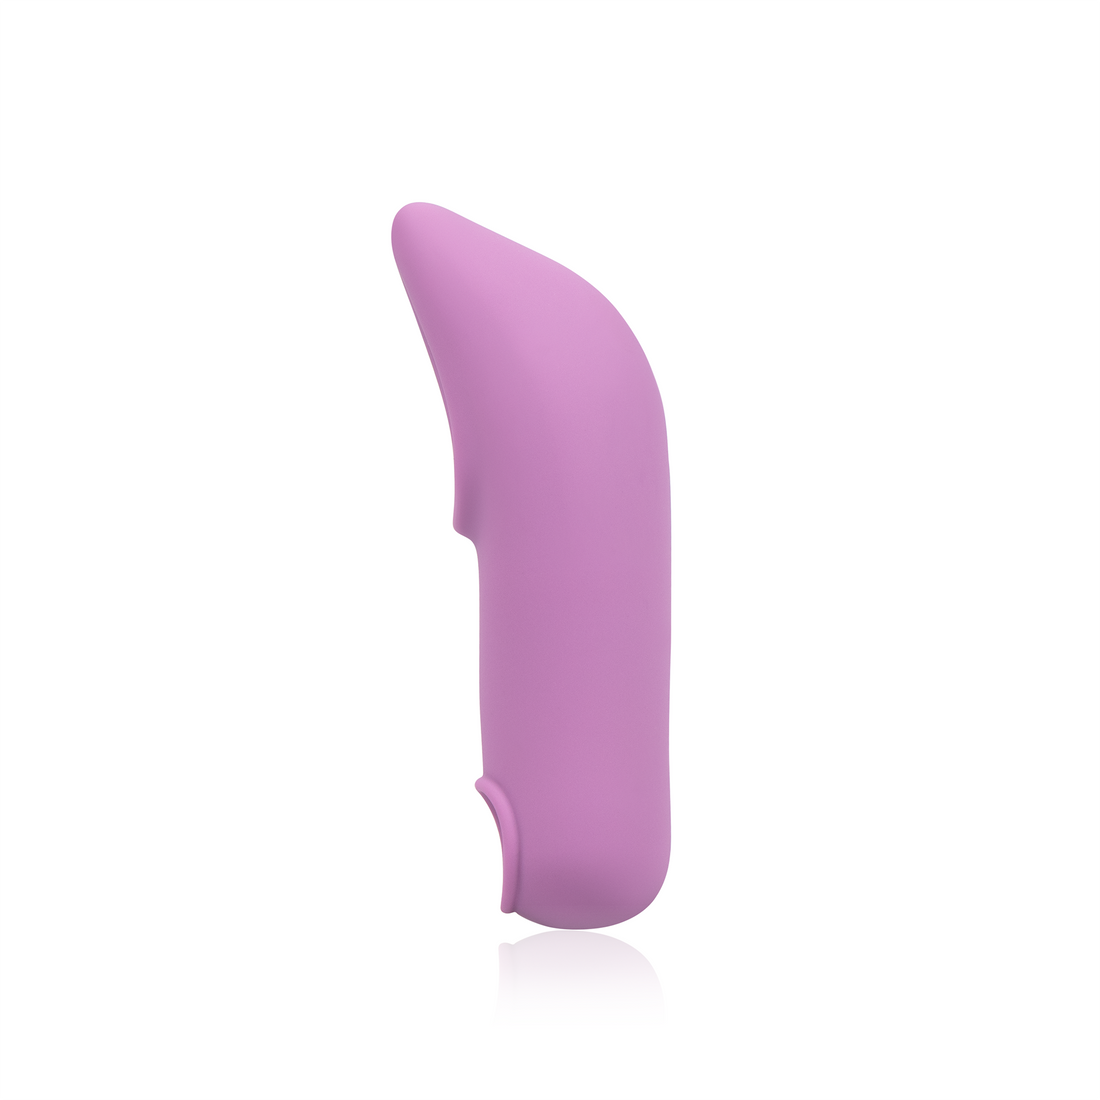 The side of the Vibrator Sleeves for Bullet Vibrator Purple